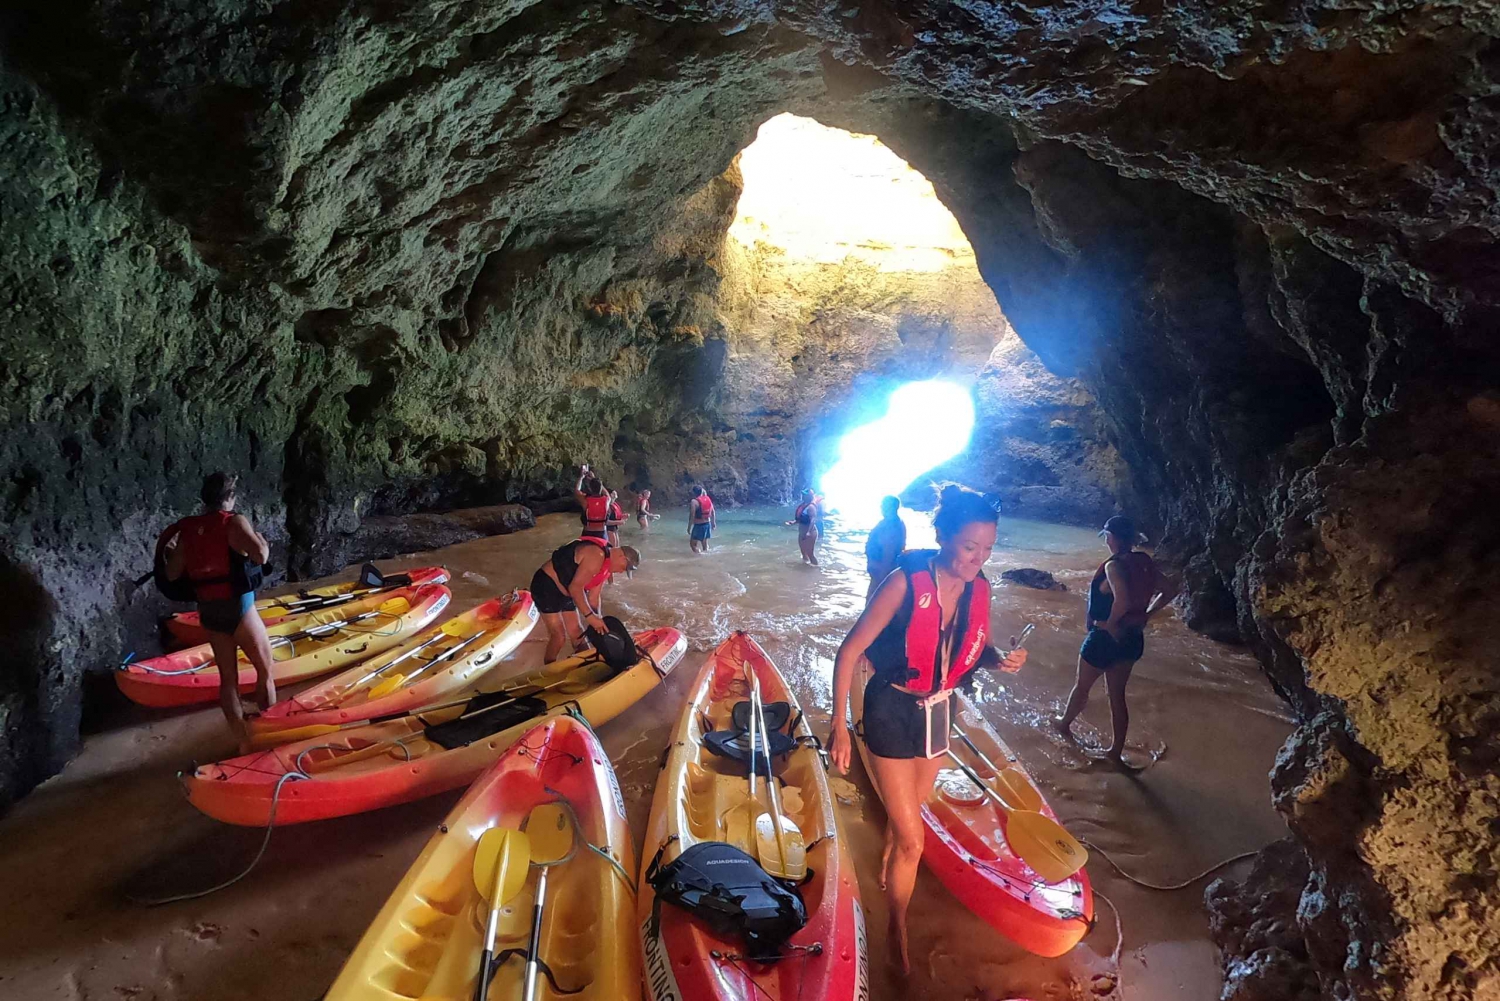 Boat & Kayak Tour - Explore Caves and Beaches of Alvor